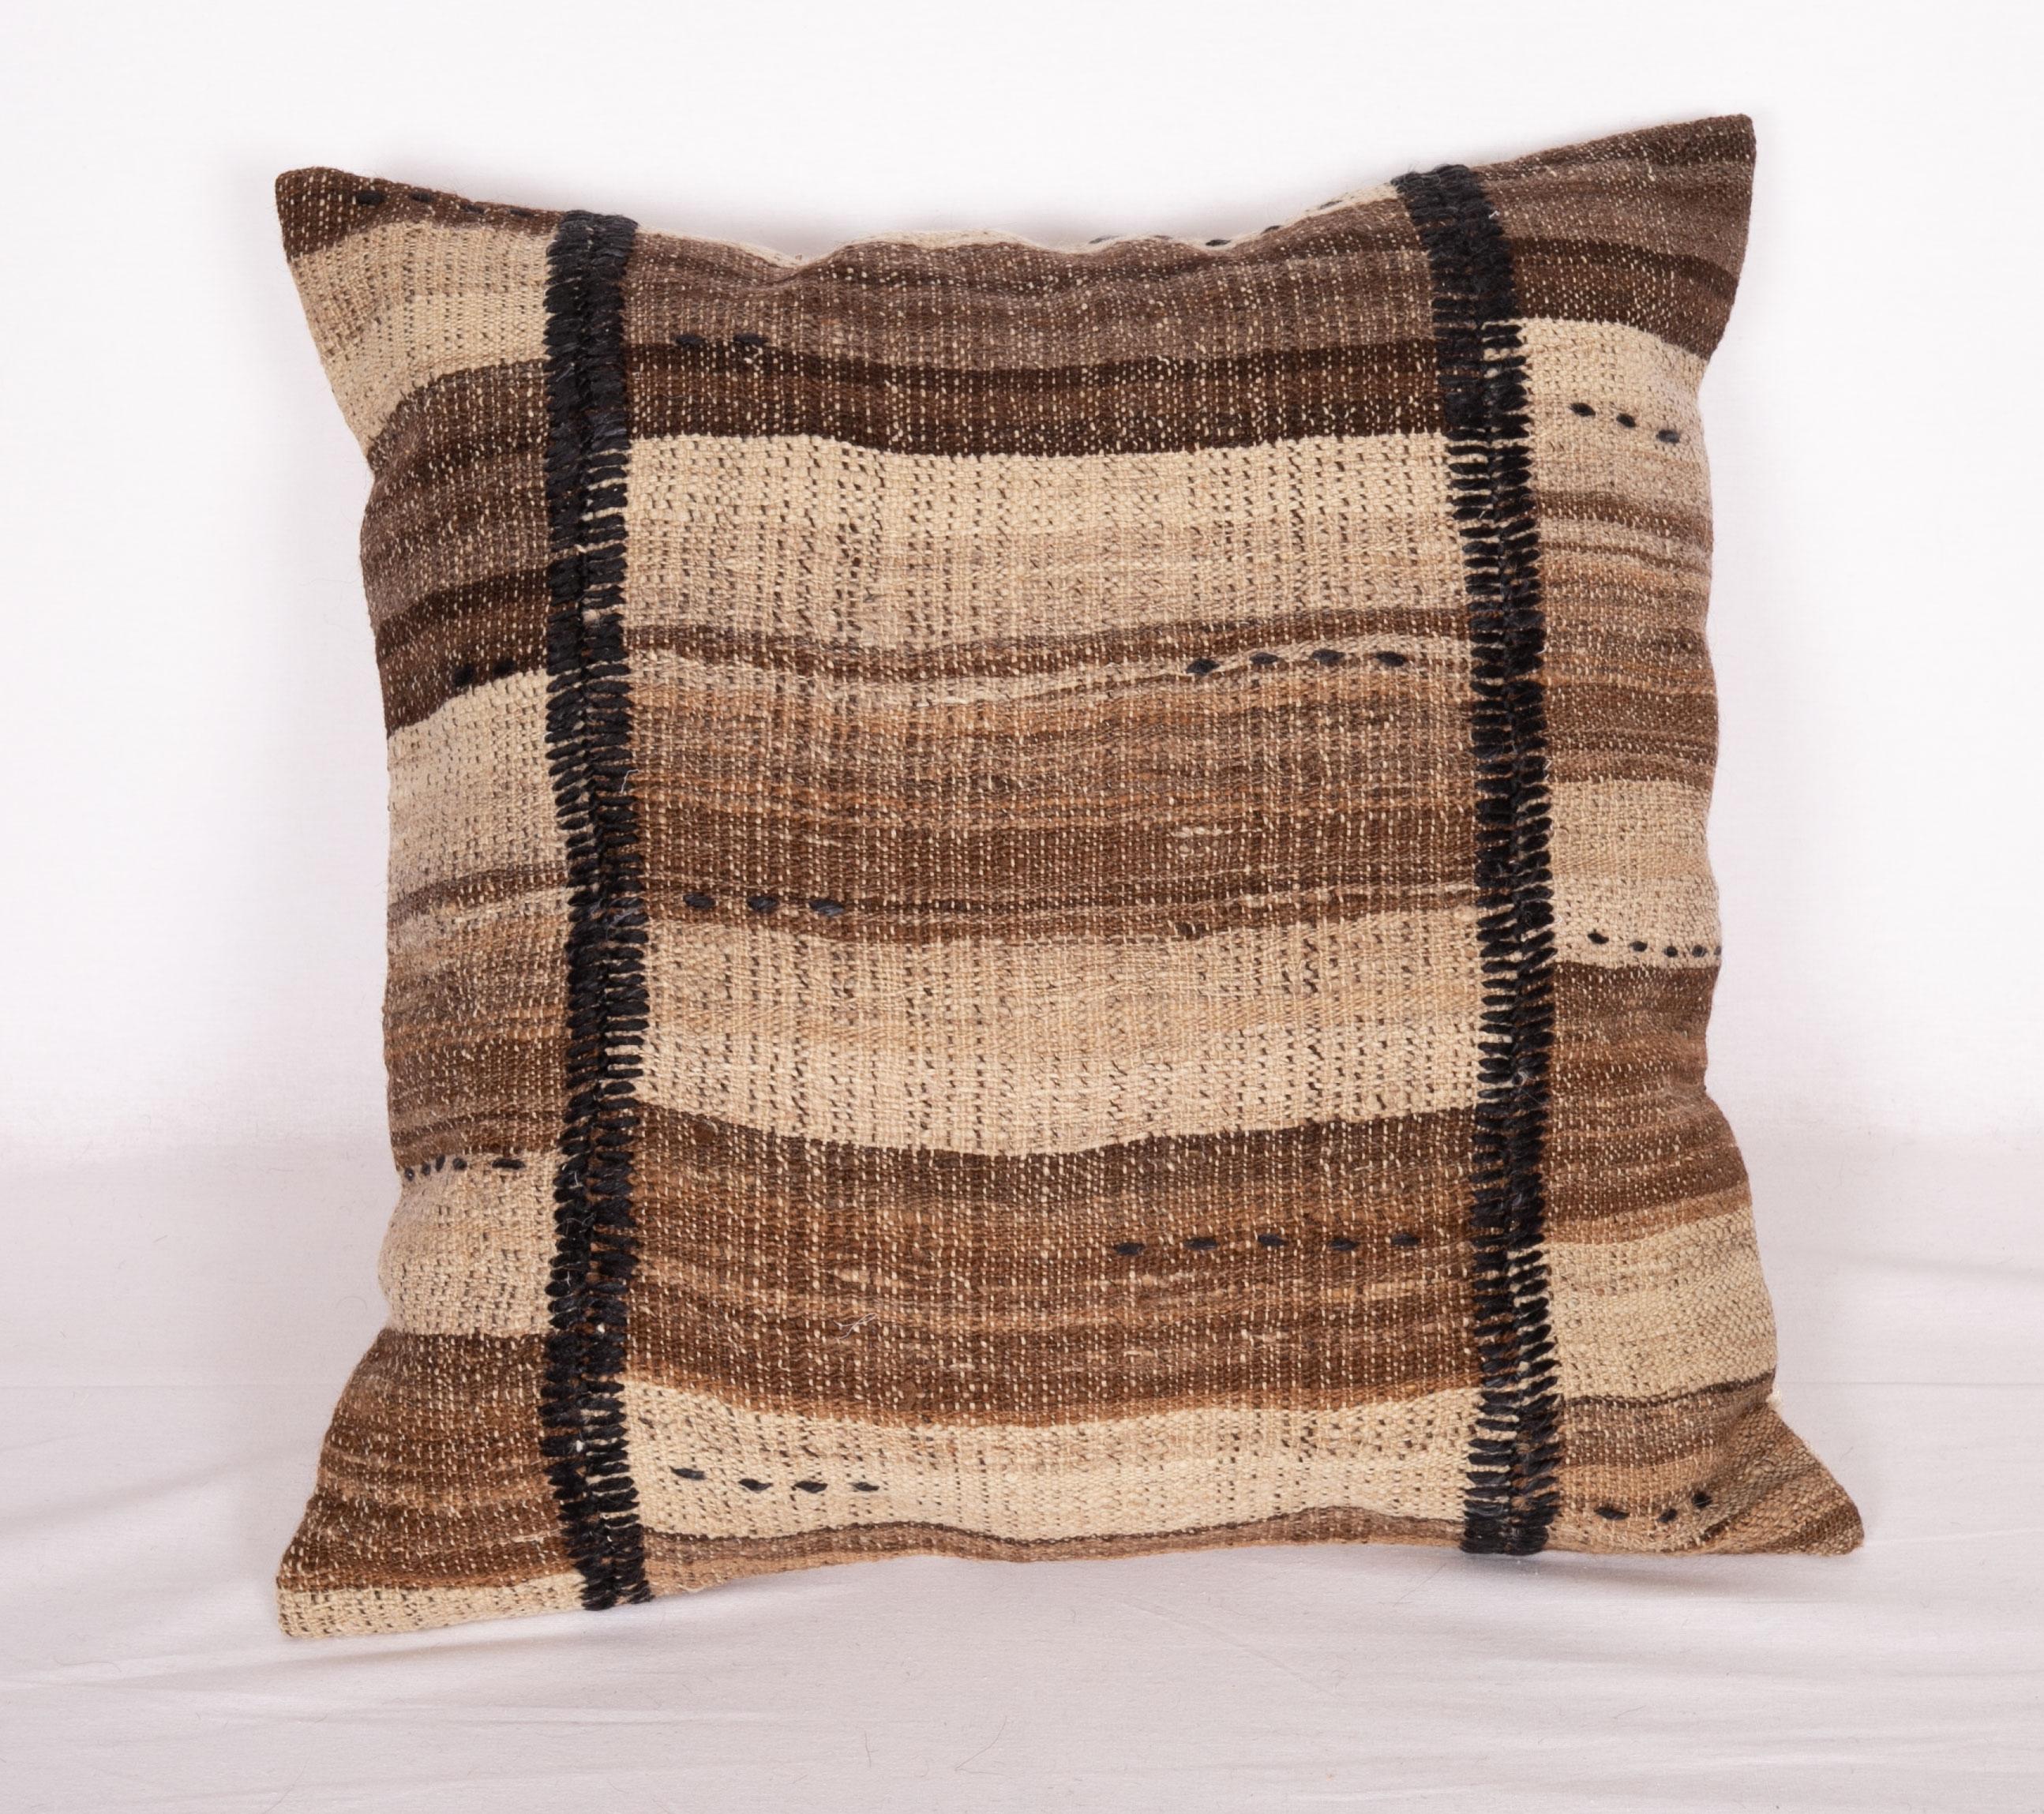 Kilim Neutral Pillow Cases Made from an Anatolian Vintage Cover, Mid-20th Century